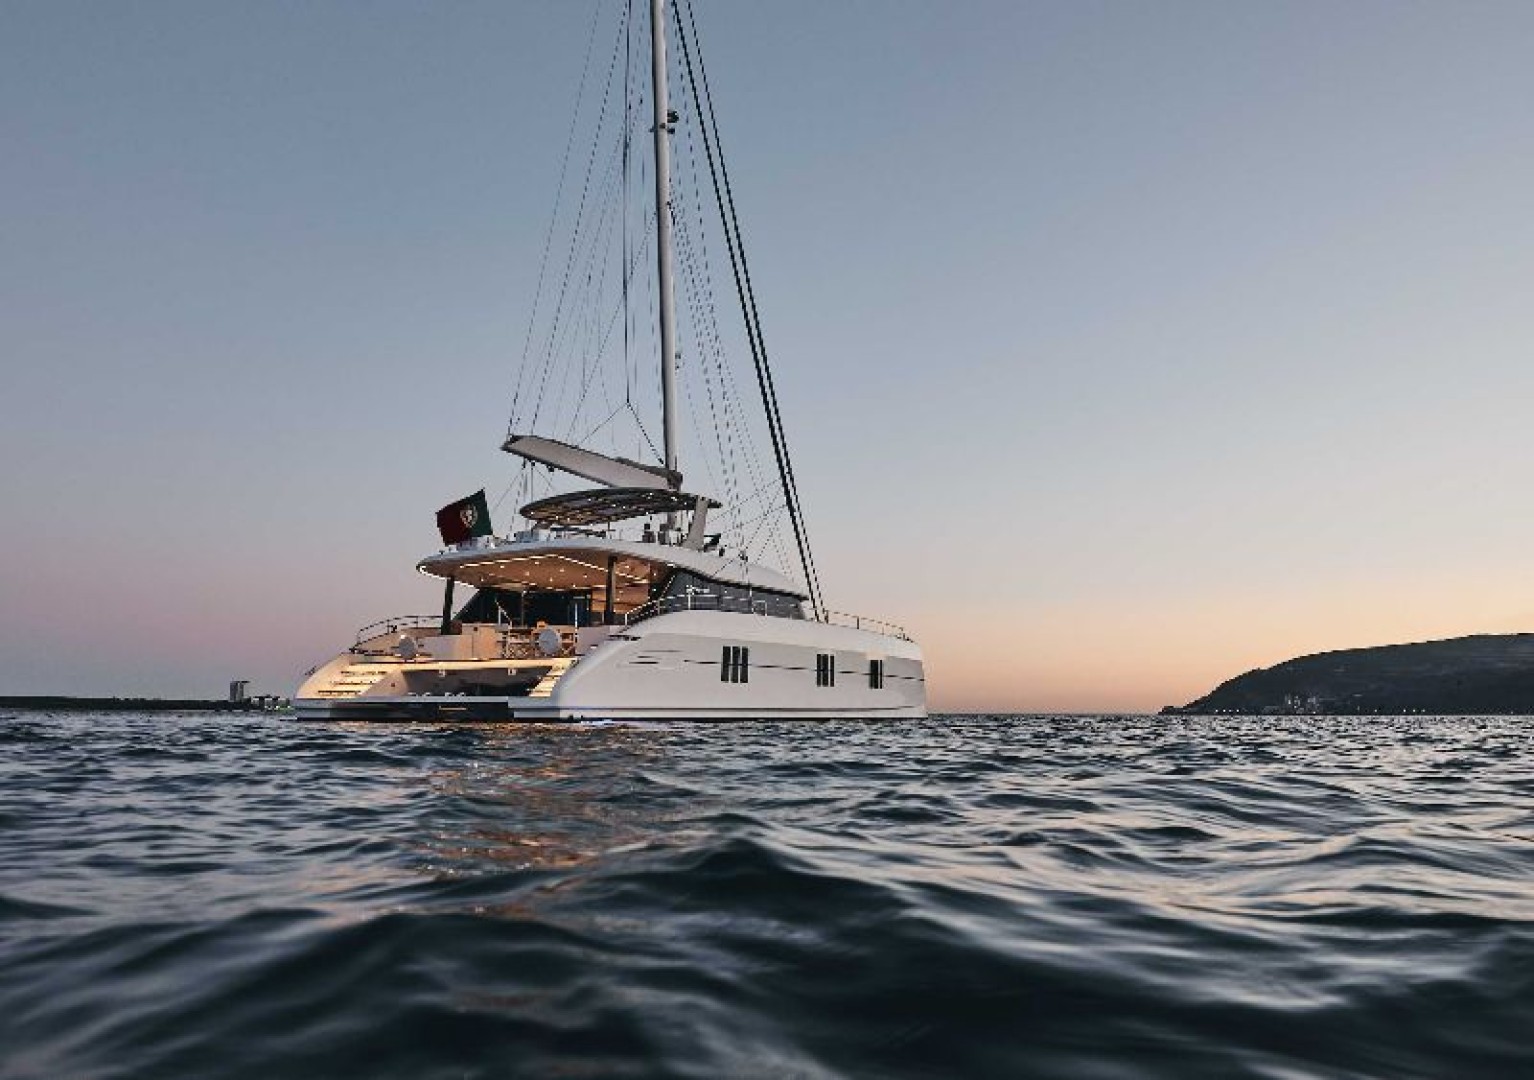 Sunreef Yachts Expansion In Turkey